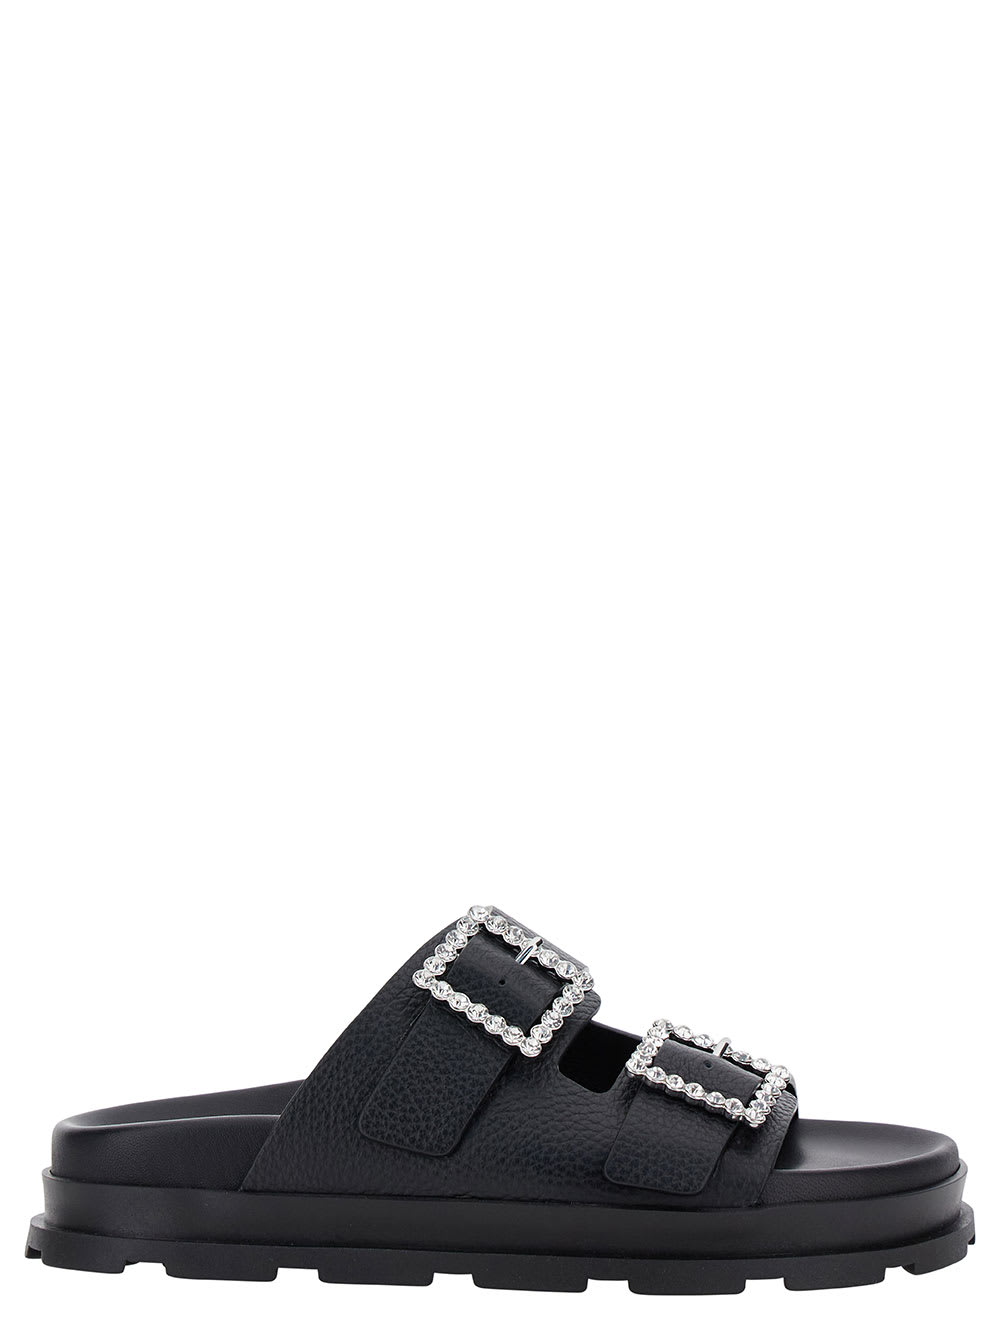 Black Sandals With Rhinestone Buckle In Hammered Leather Woman